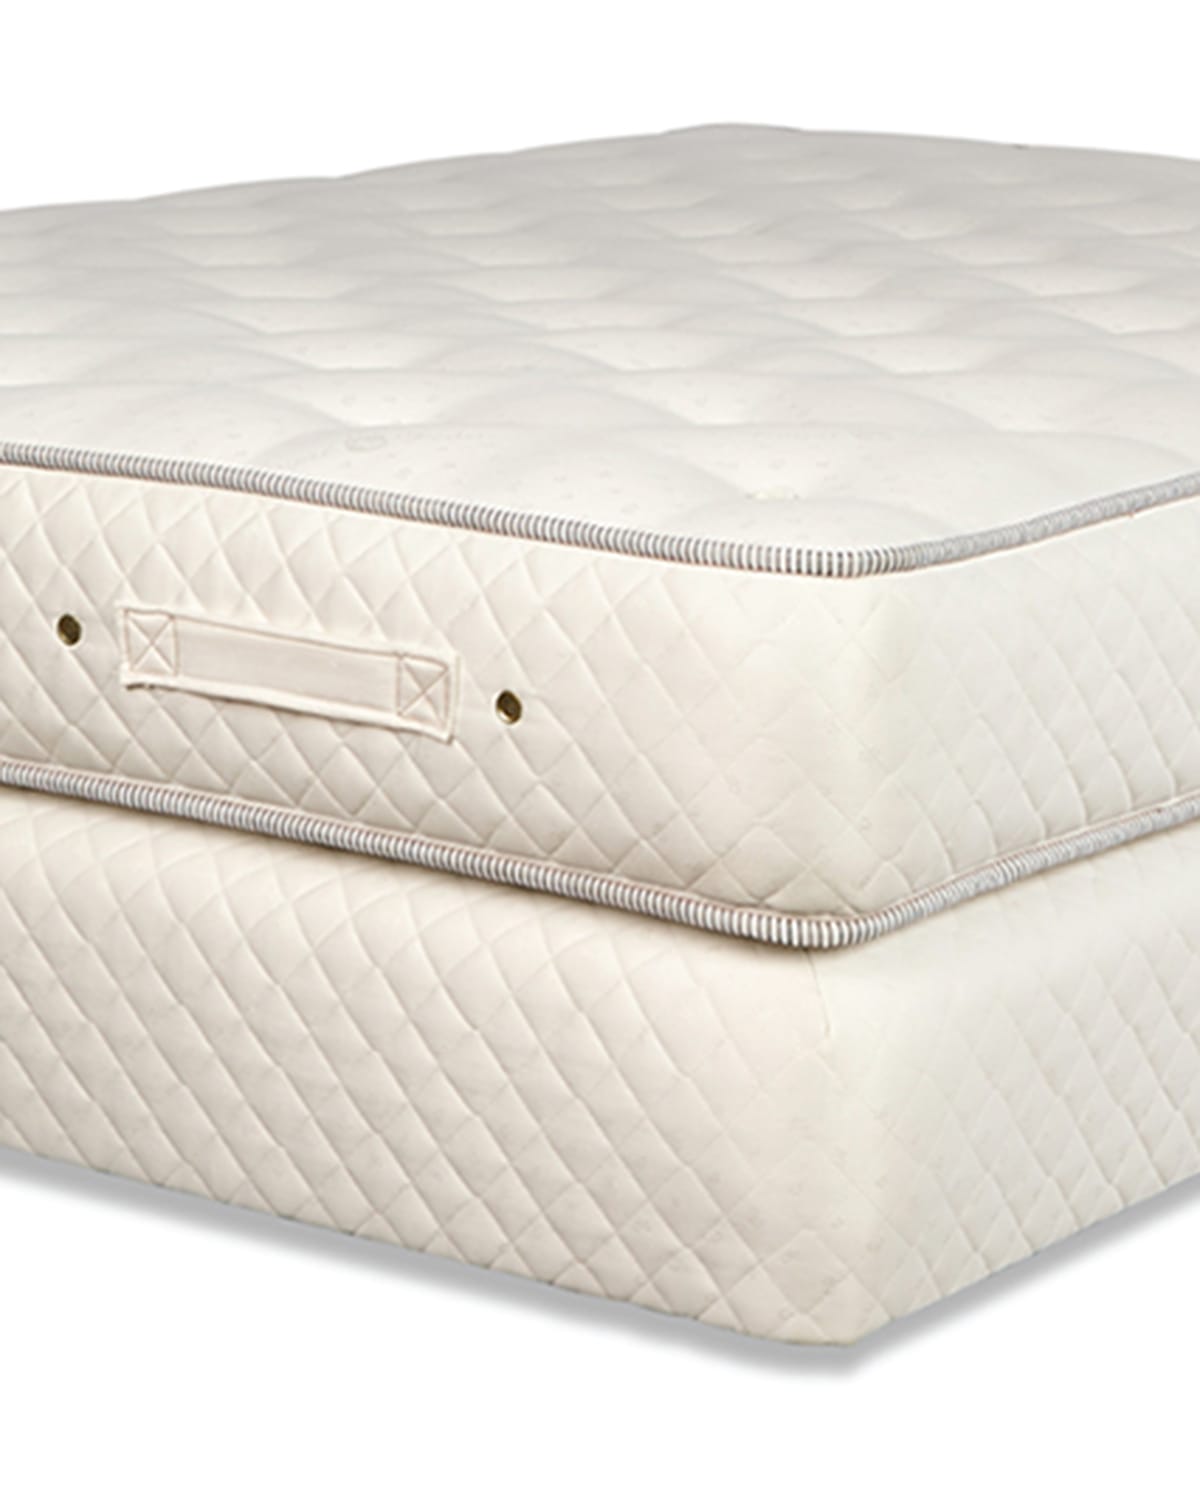 Royal-pedic Dream Spring Limited Firm Twin Xl Mattress Set In White